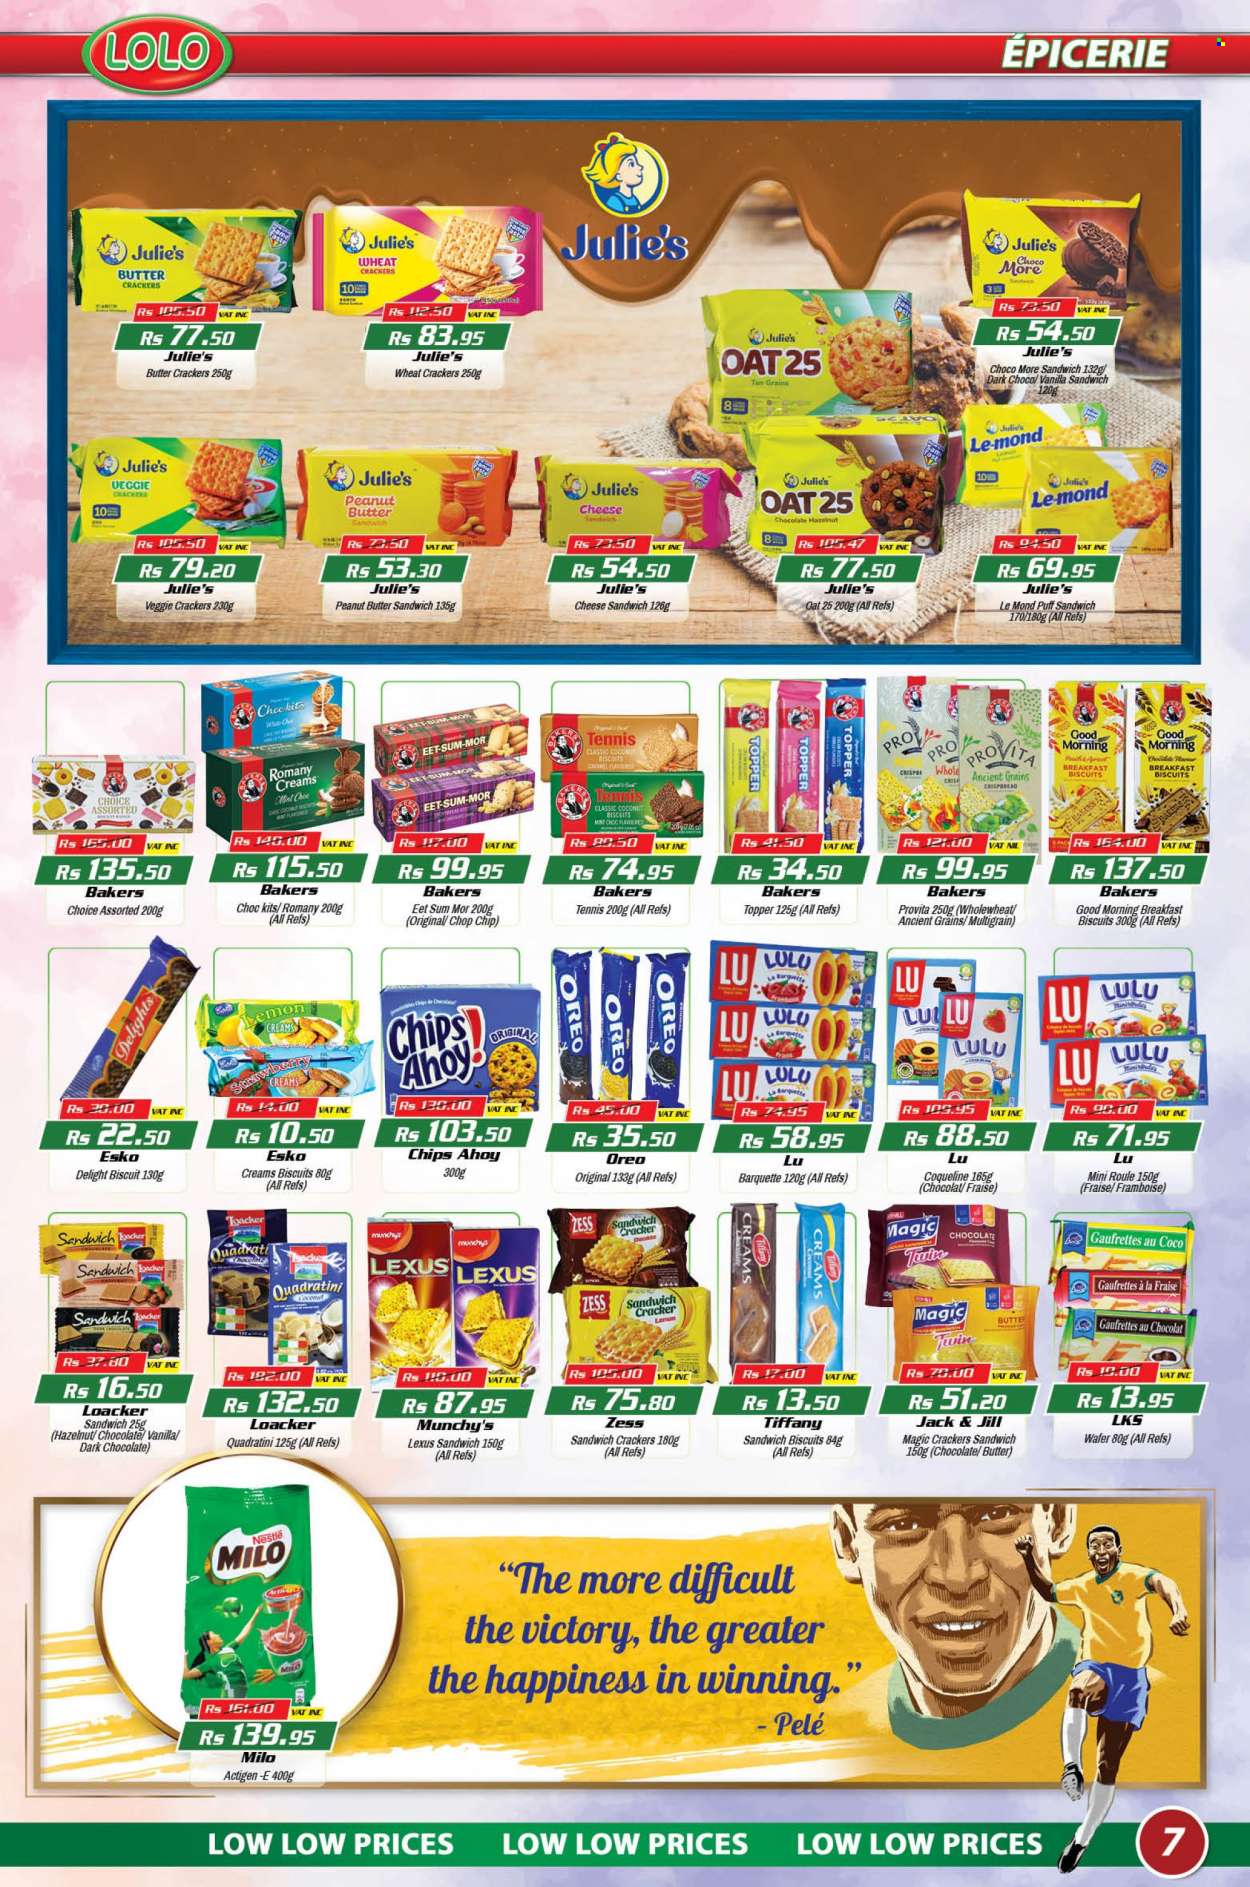 thumbnail - LOLO Hyper Catalogue - 25.11.2022 - 14.12.2022 - Sales products - crispbread, Milo, wafers, crackers, biscuit, dark chocolate, Julie's, oats, caramel, peanut butter, Bakers, Nestlé, Oreo. Page 7.